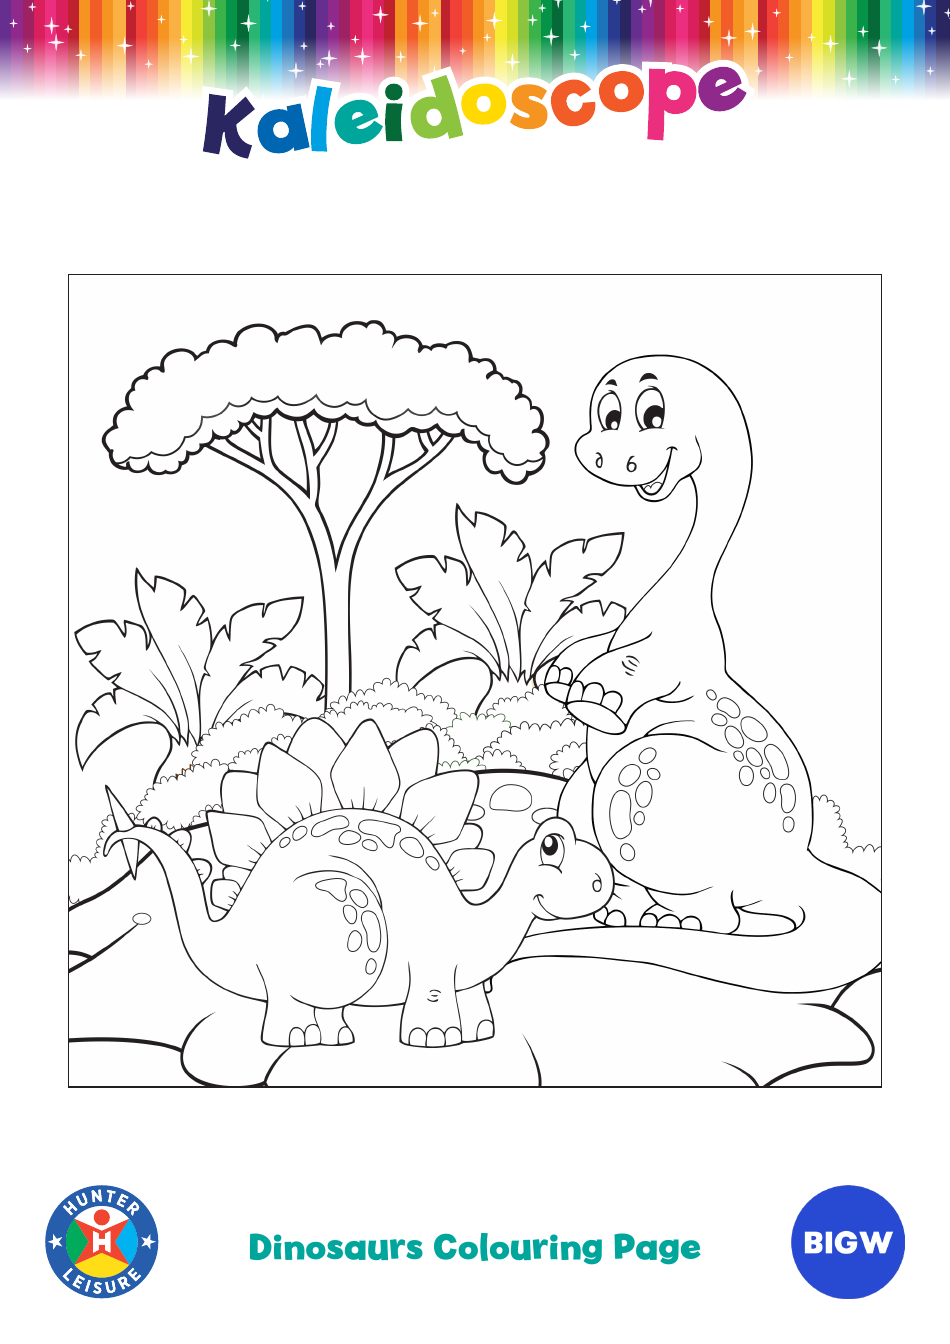 Dinosaurs Coloring Page Download Printable PDF | Templateroller